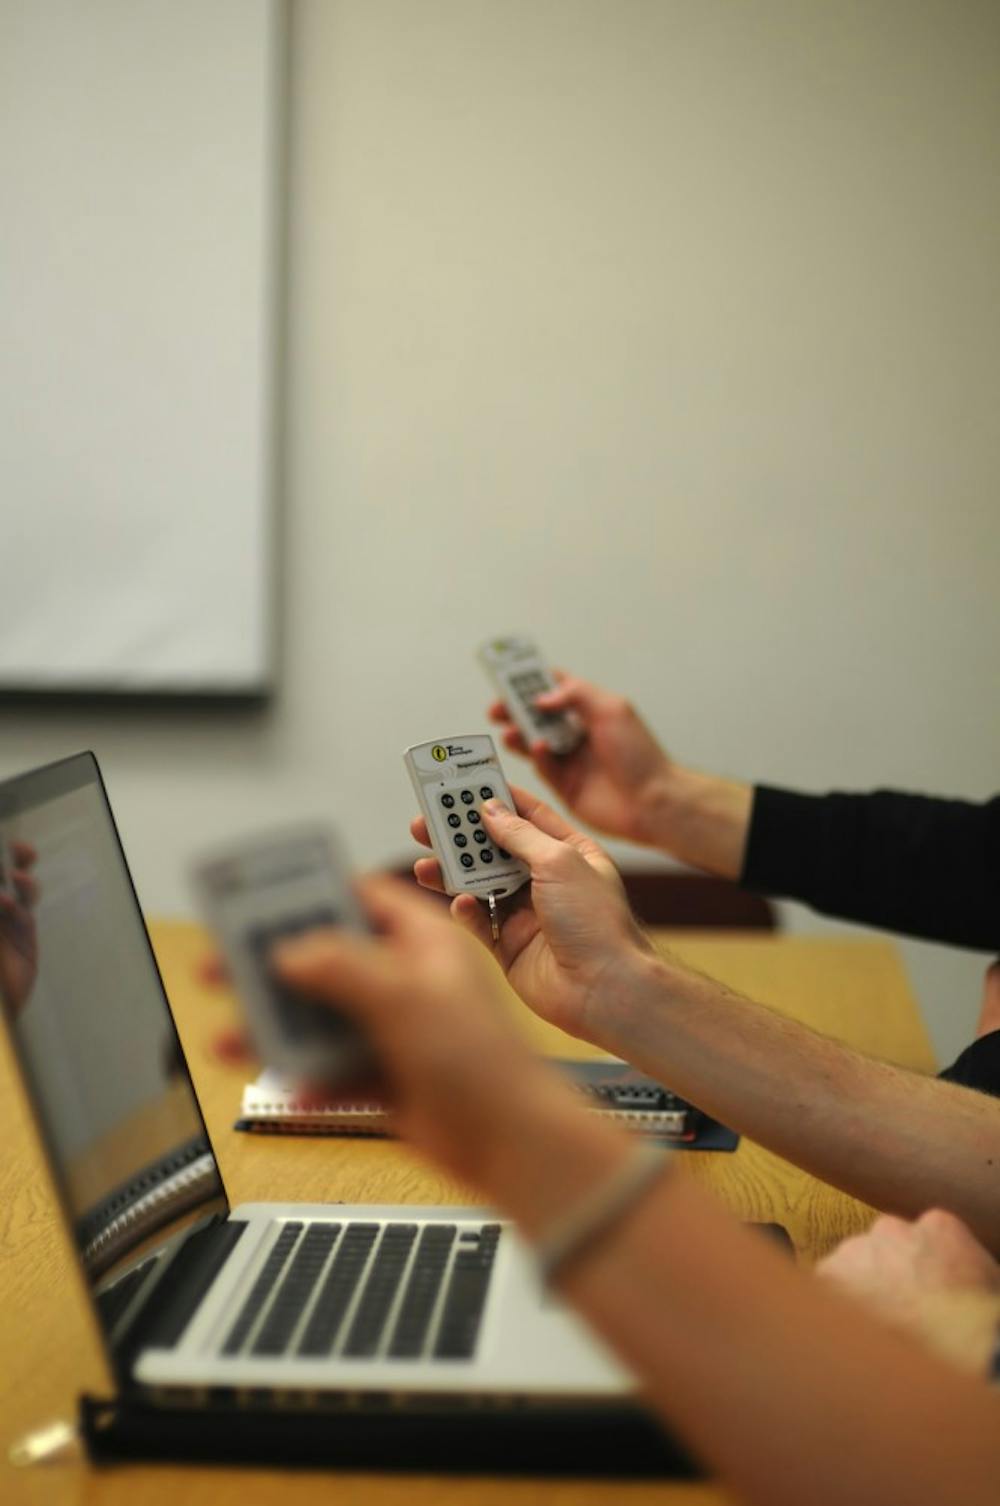 Professors use clickers to track attendance, participation